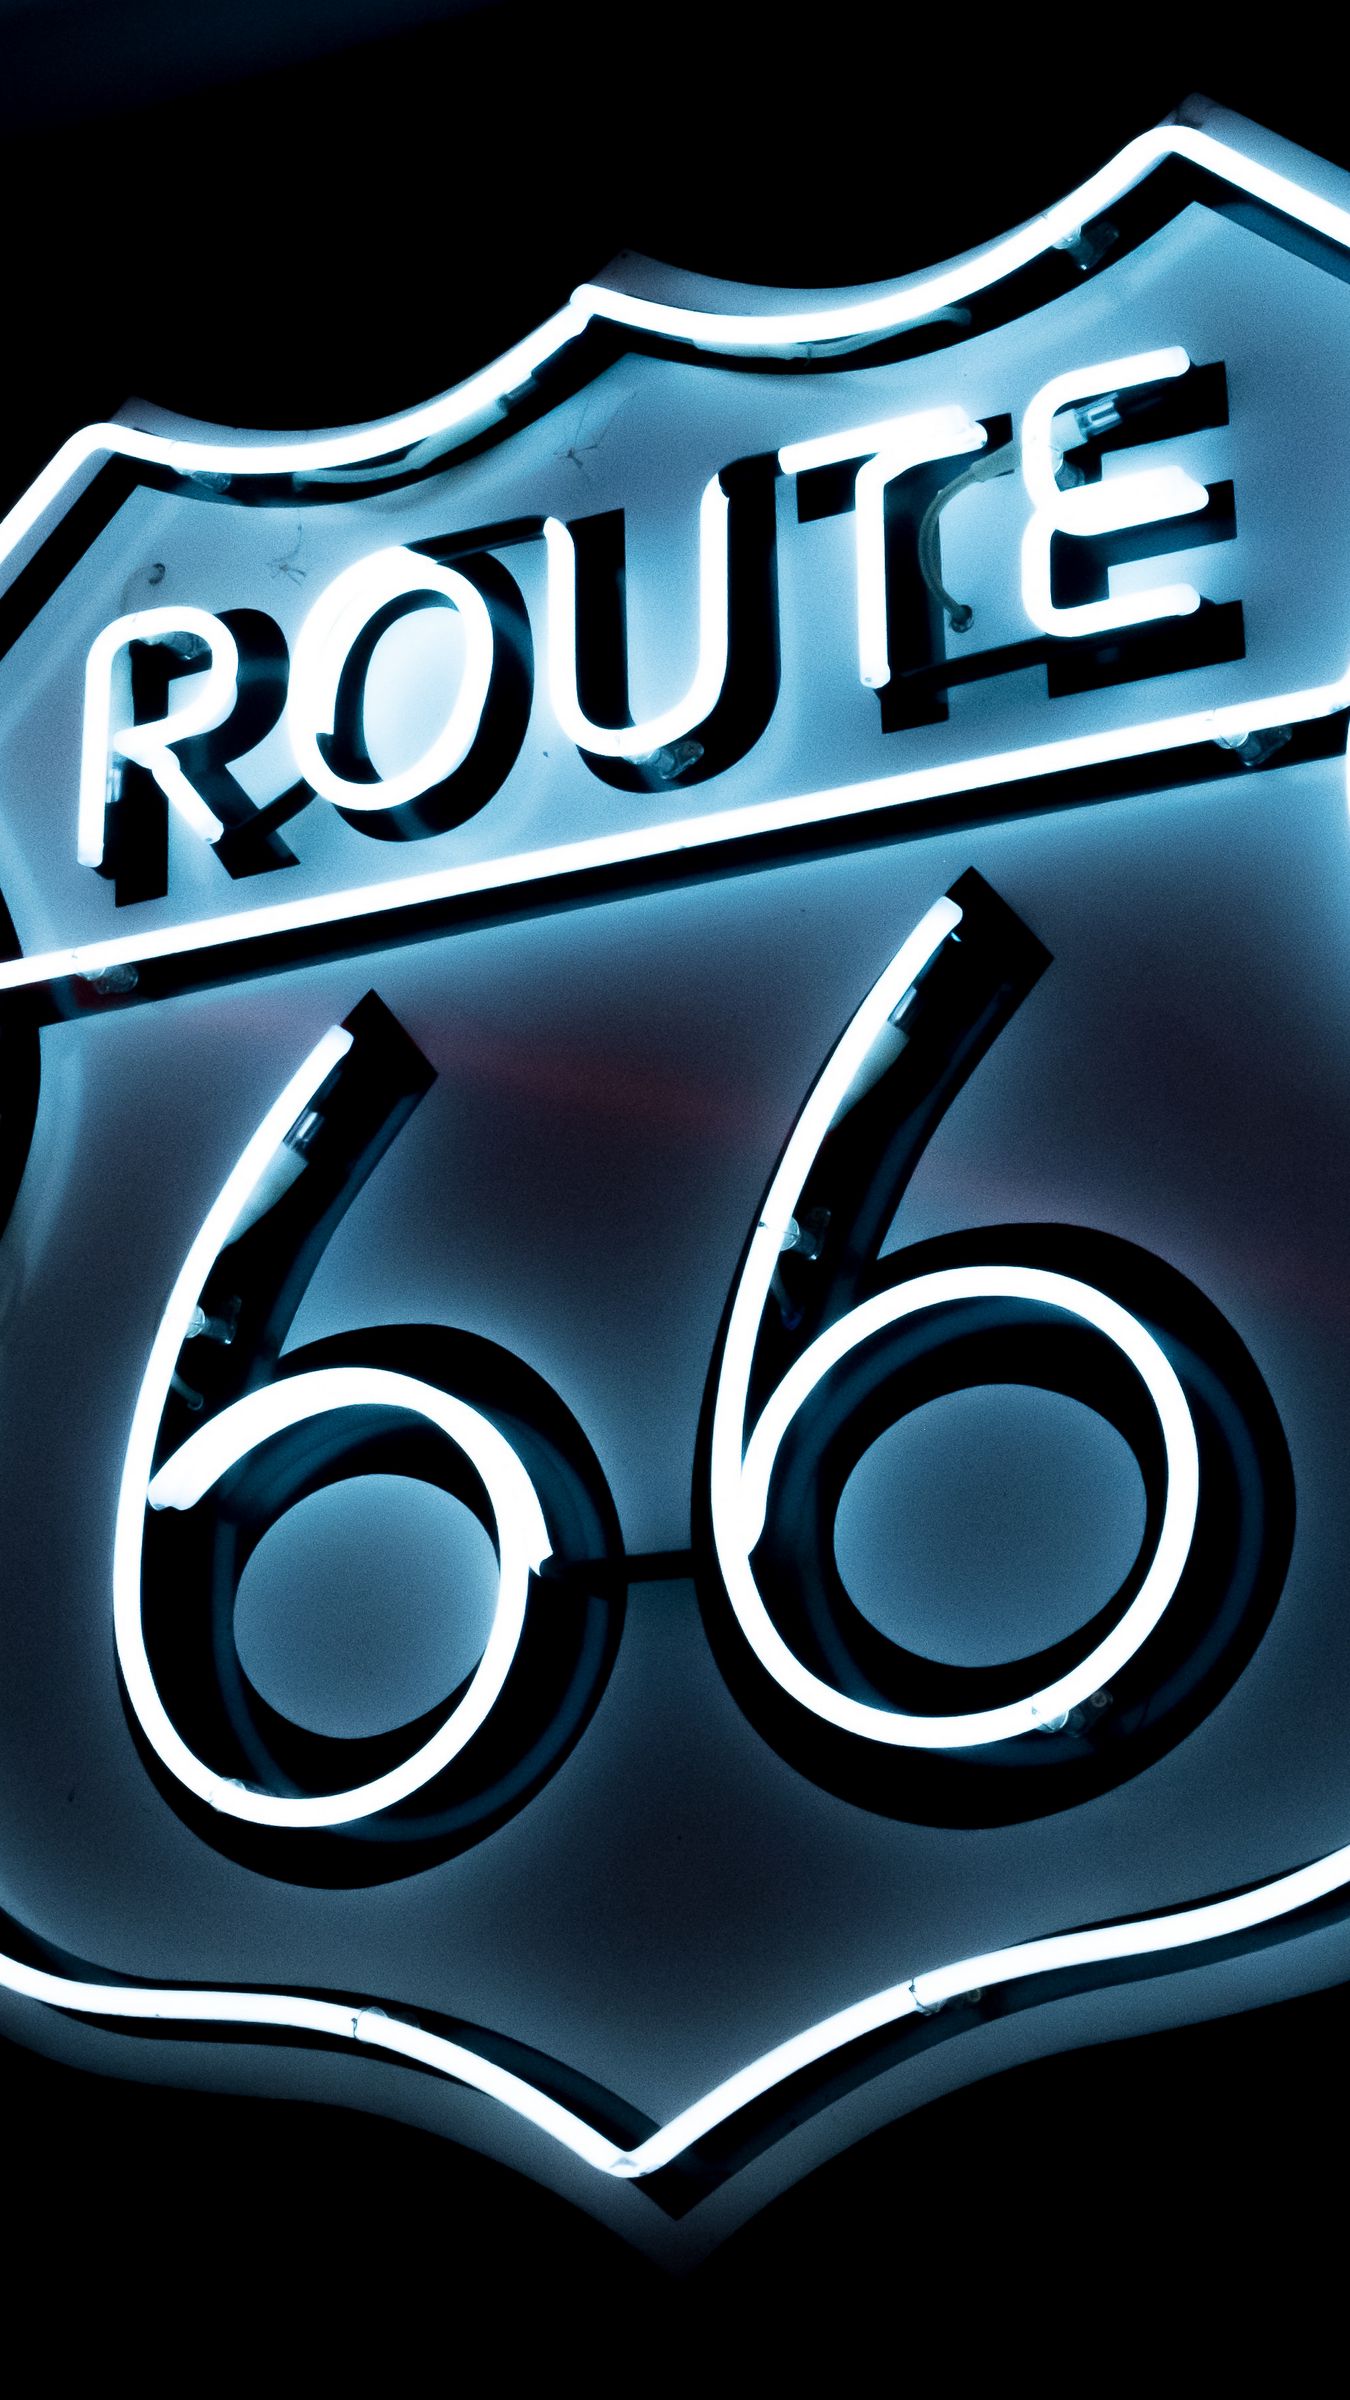 Download wallpaper 1350x2400 route 66 neon numbers inscription iphone  876s6 for parallax hd background